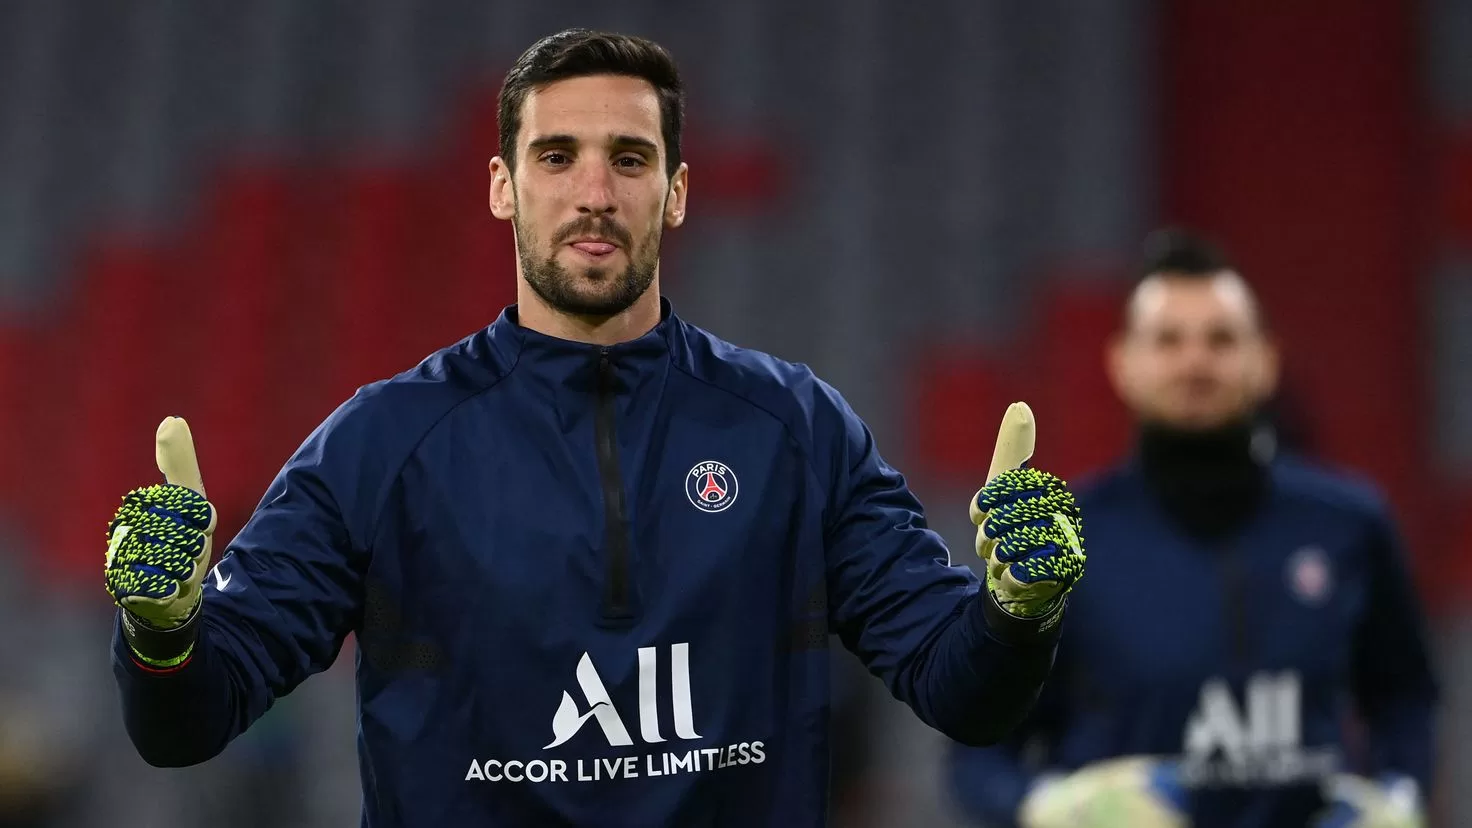 Sergio Rico will receive a medical discharge this Friday
